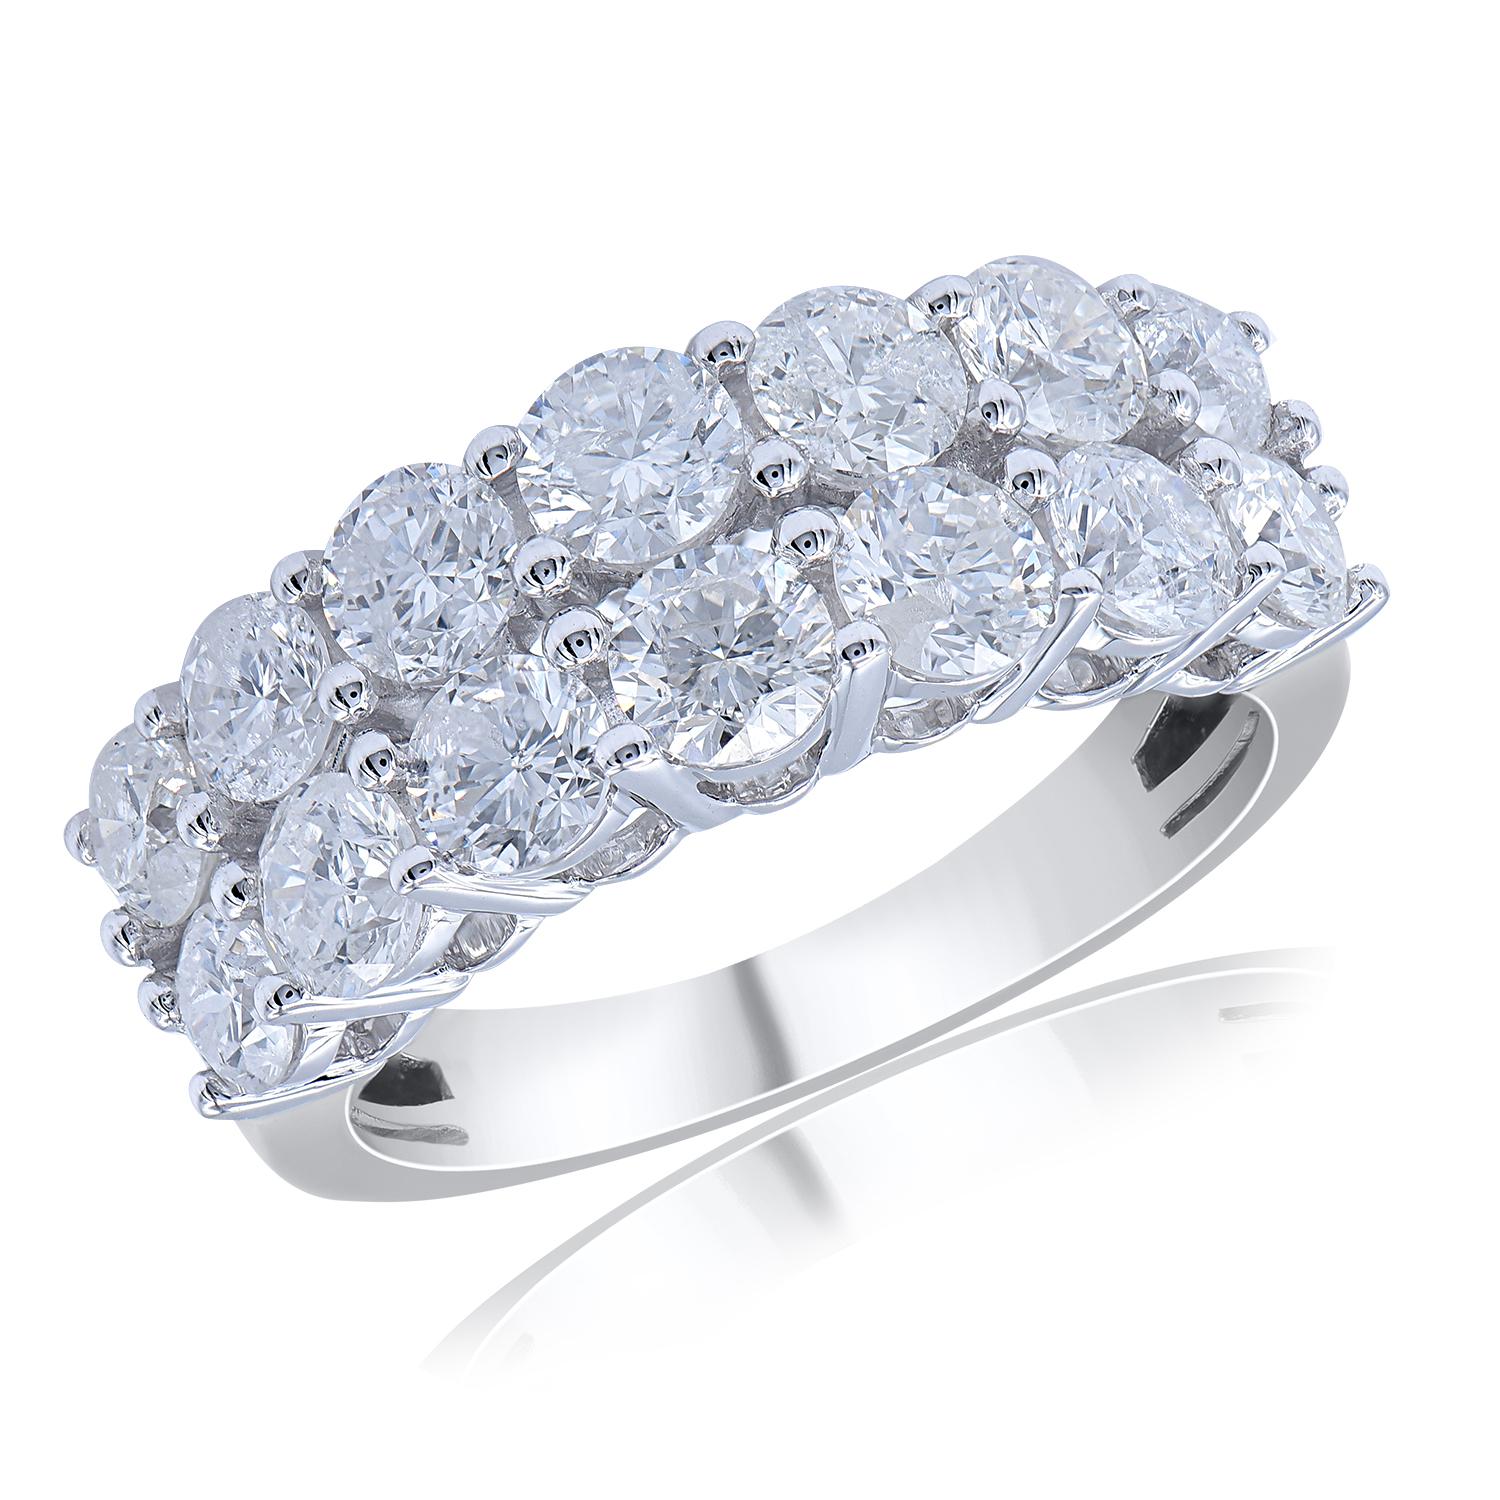 Glitters with 14 round-cut diamonds in prong setting and crafted in 14 KT white gold (H-I Color, I3 Clarity) This half eternity diamond studded wedding ring is sure to make you stand out. This sparkling diamond wedding band is a classic favorite